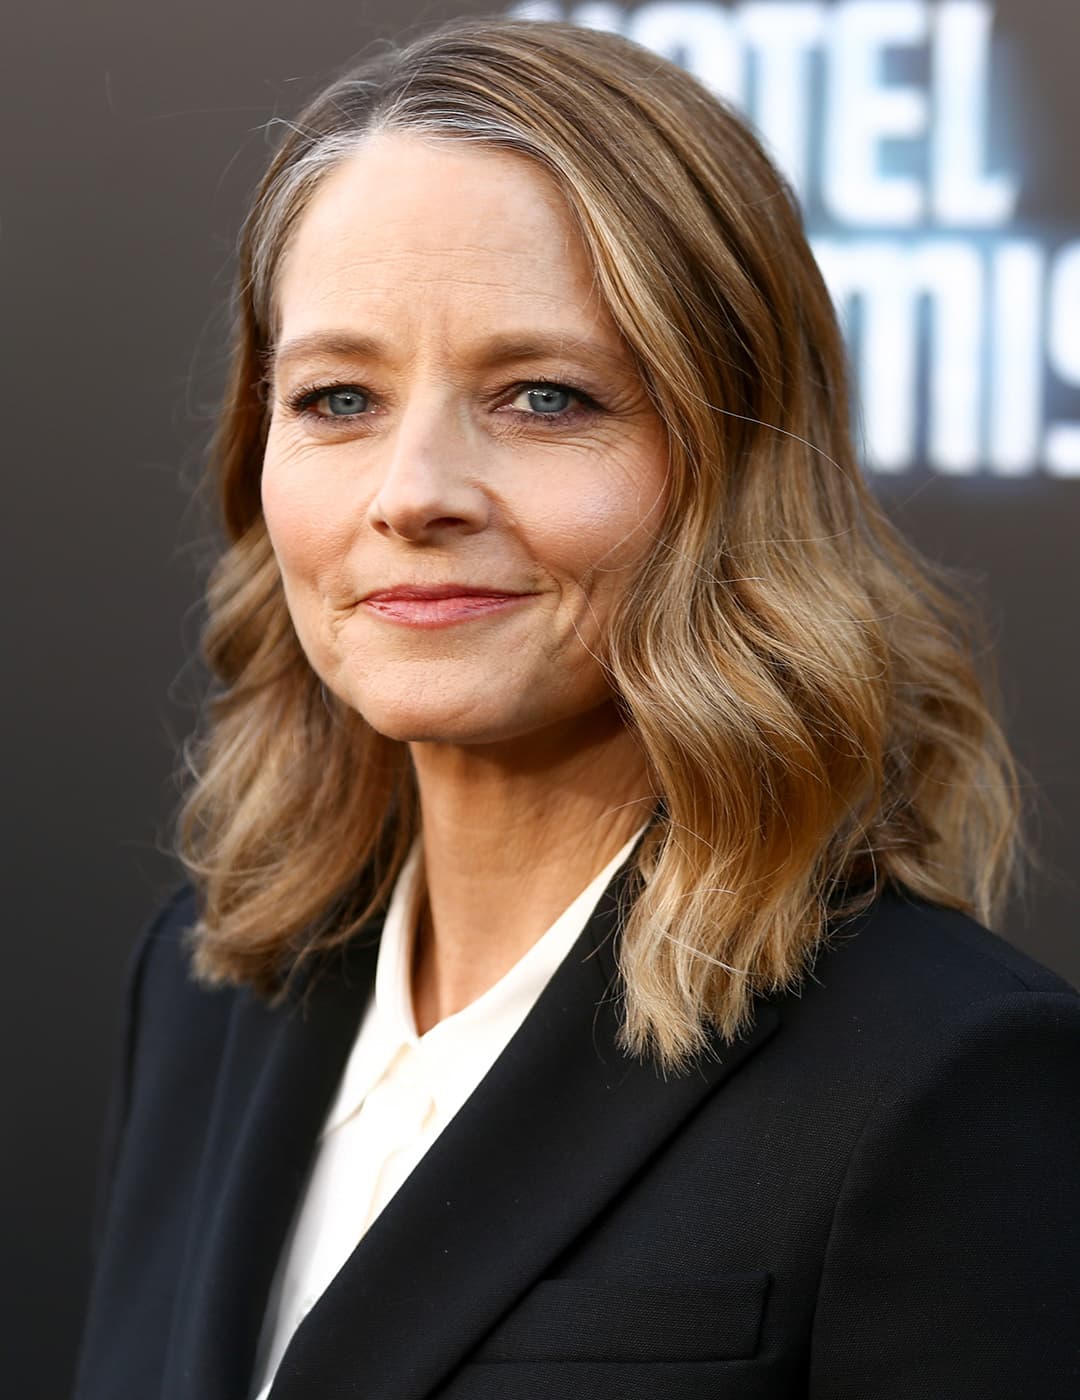 A photo of Jodie Foster wearing a simple black pantsuit with her tousled shoulder length hair